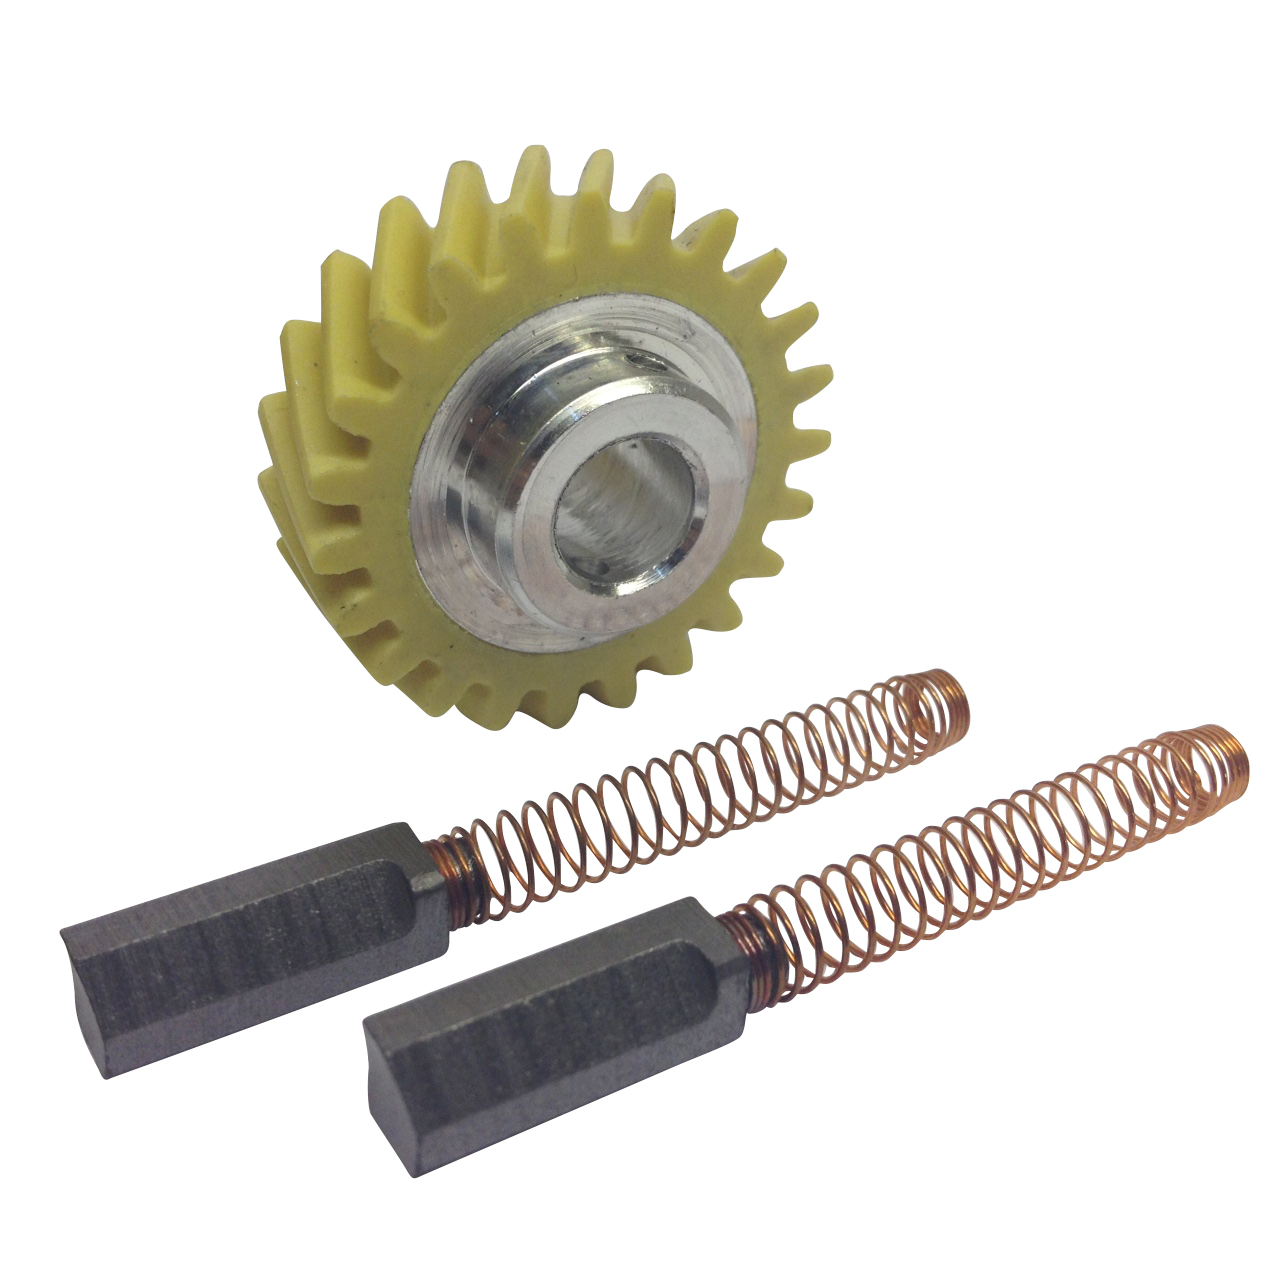 W10112253 Mixer Worm Gear Replacement for KitchenAid KSM75 Mixer